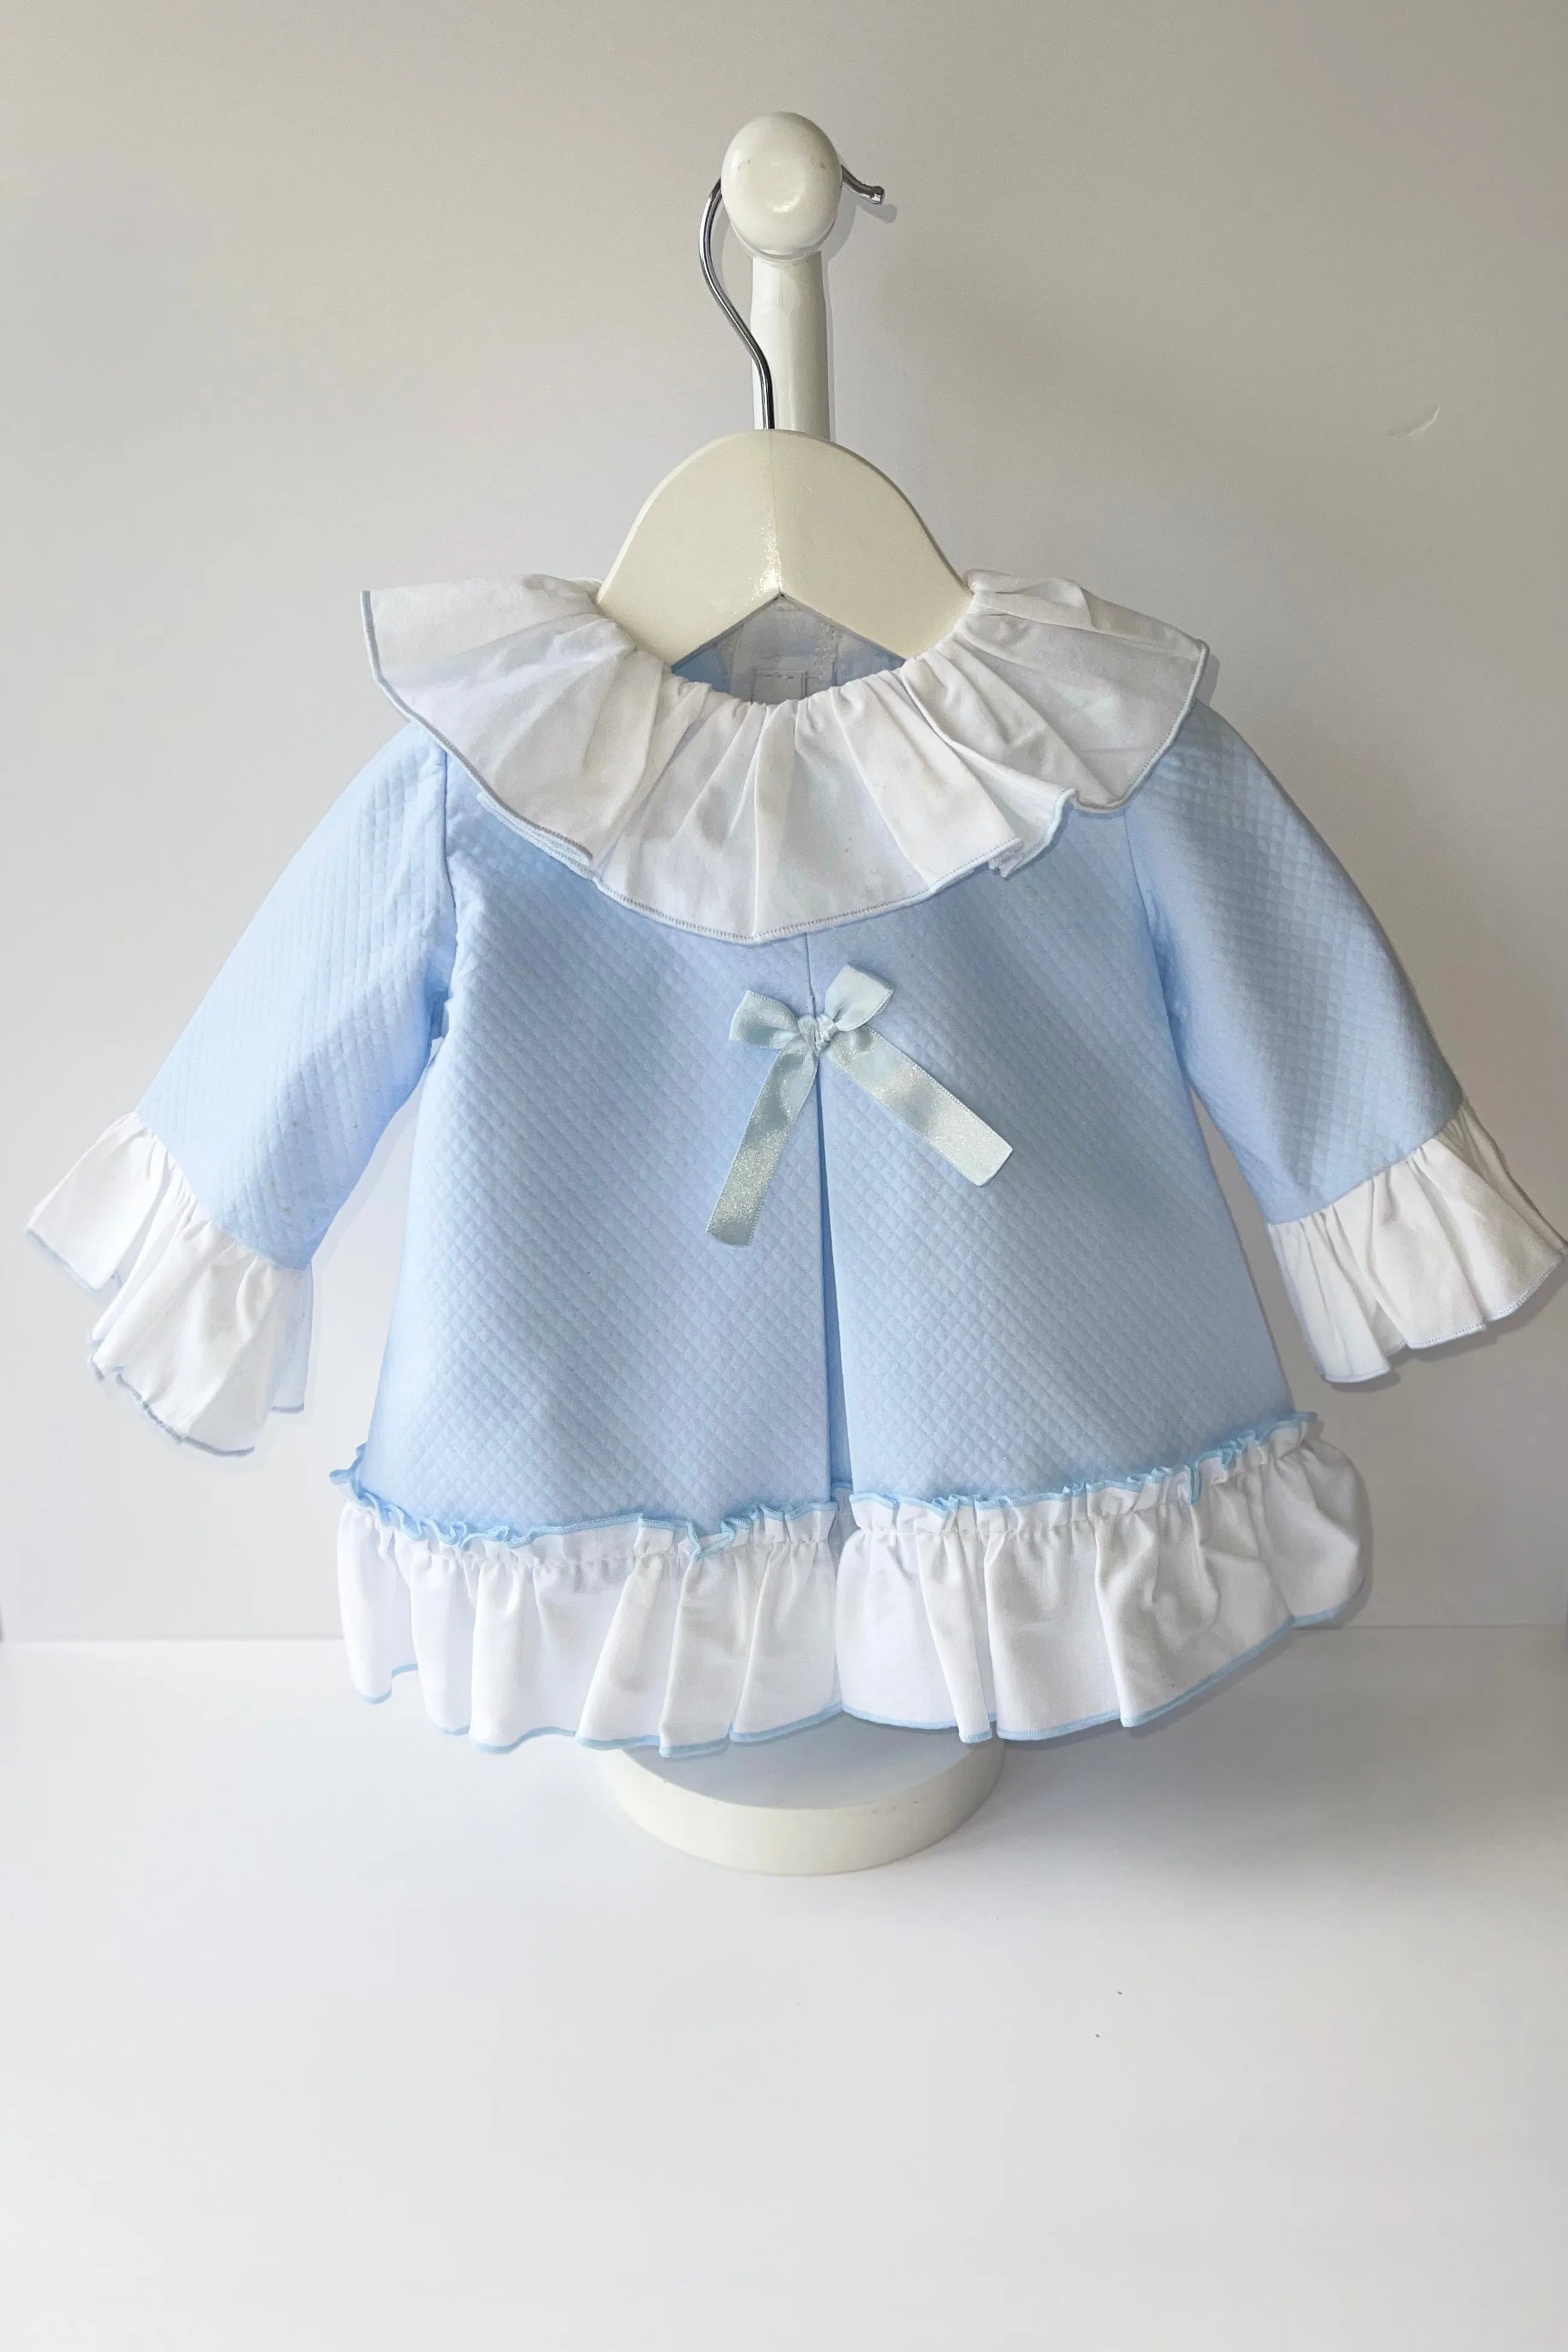 AW22 Lor Miral Blue Bow Pique Dress 420 - dainty delilah spanish childrens clothing